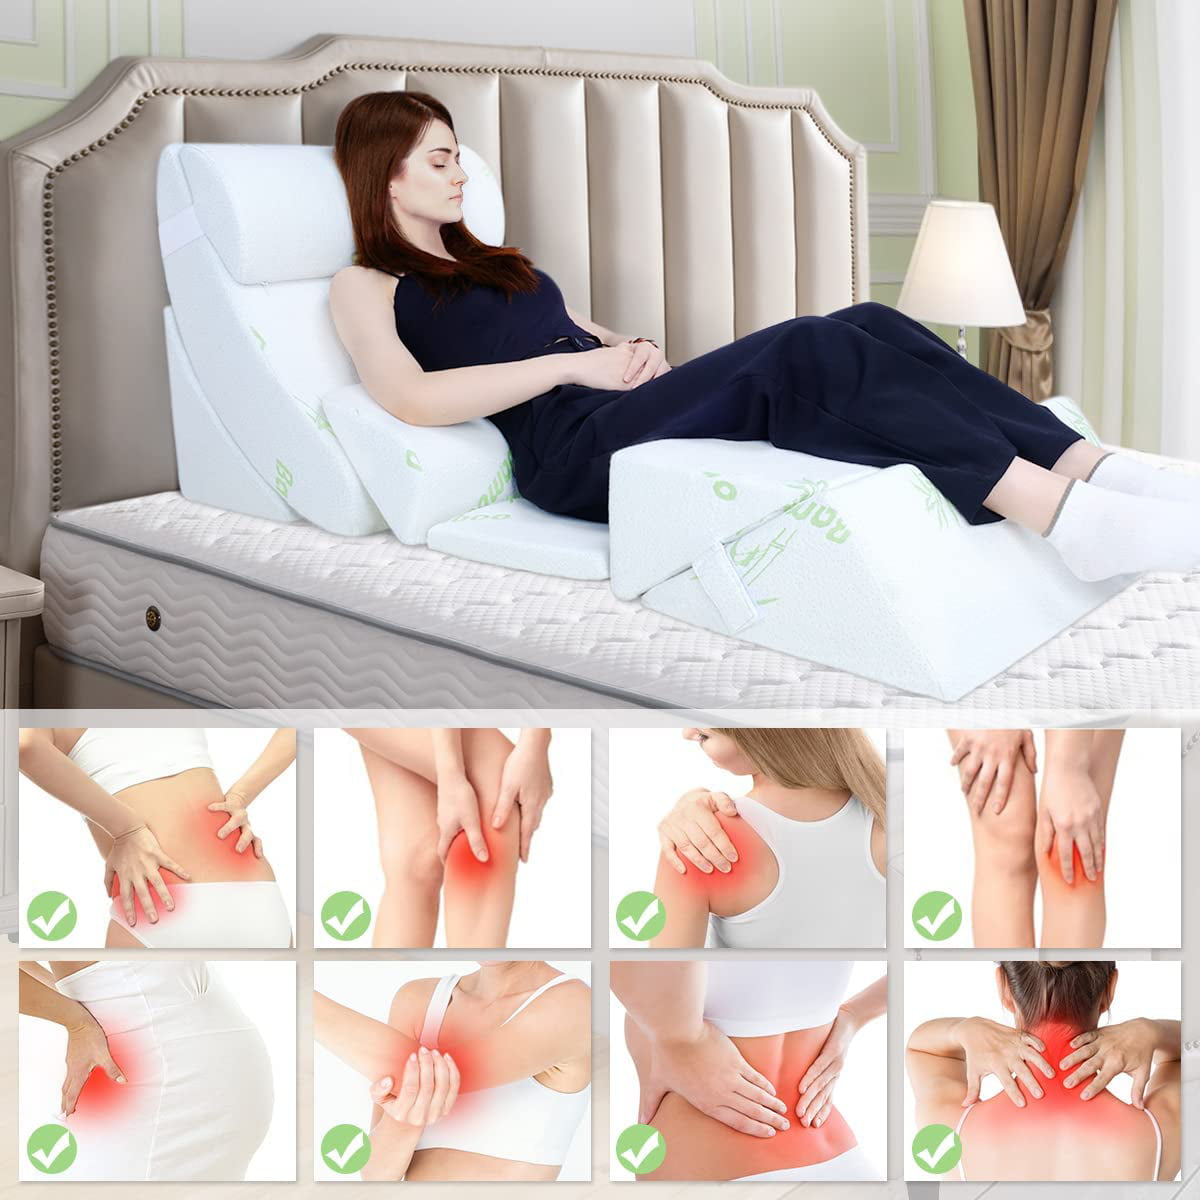 Bed Wedge Pillow Set 7PCS, Premium Foam Orthopaedic Wedge Pillow for Back  Neck Leg Pain Relief - Adjustable  Comfortable Wedge Pillows - Great for  Sleeping, Reading, Rest Elevation, FACESOFT - Walmart.com